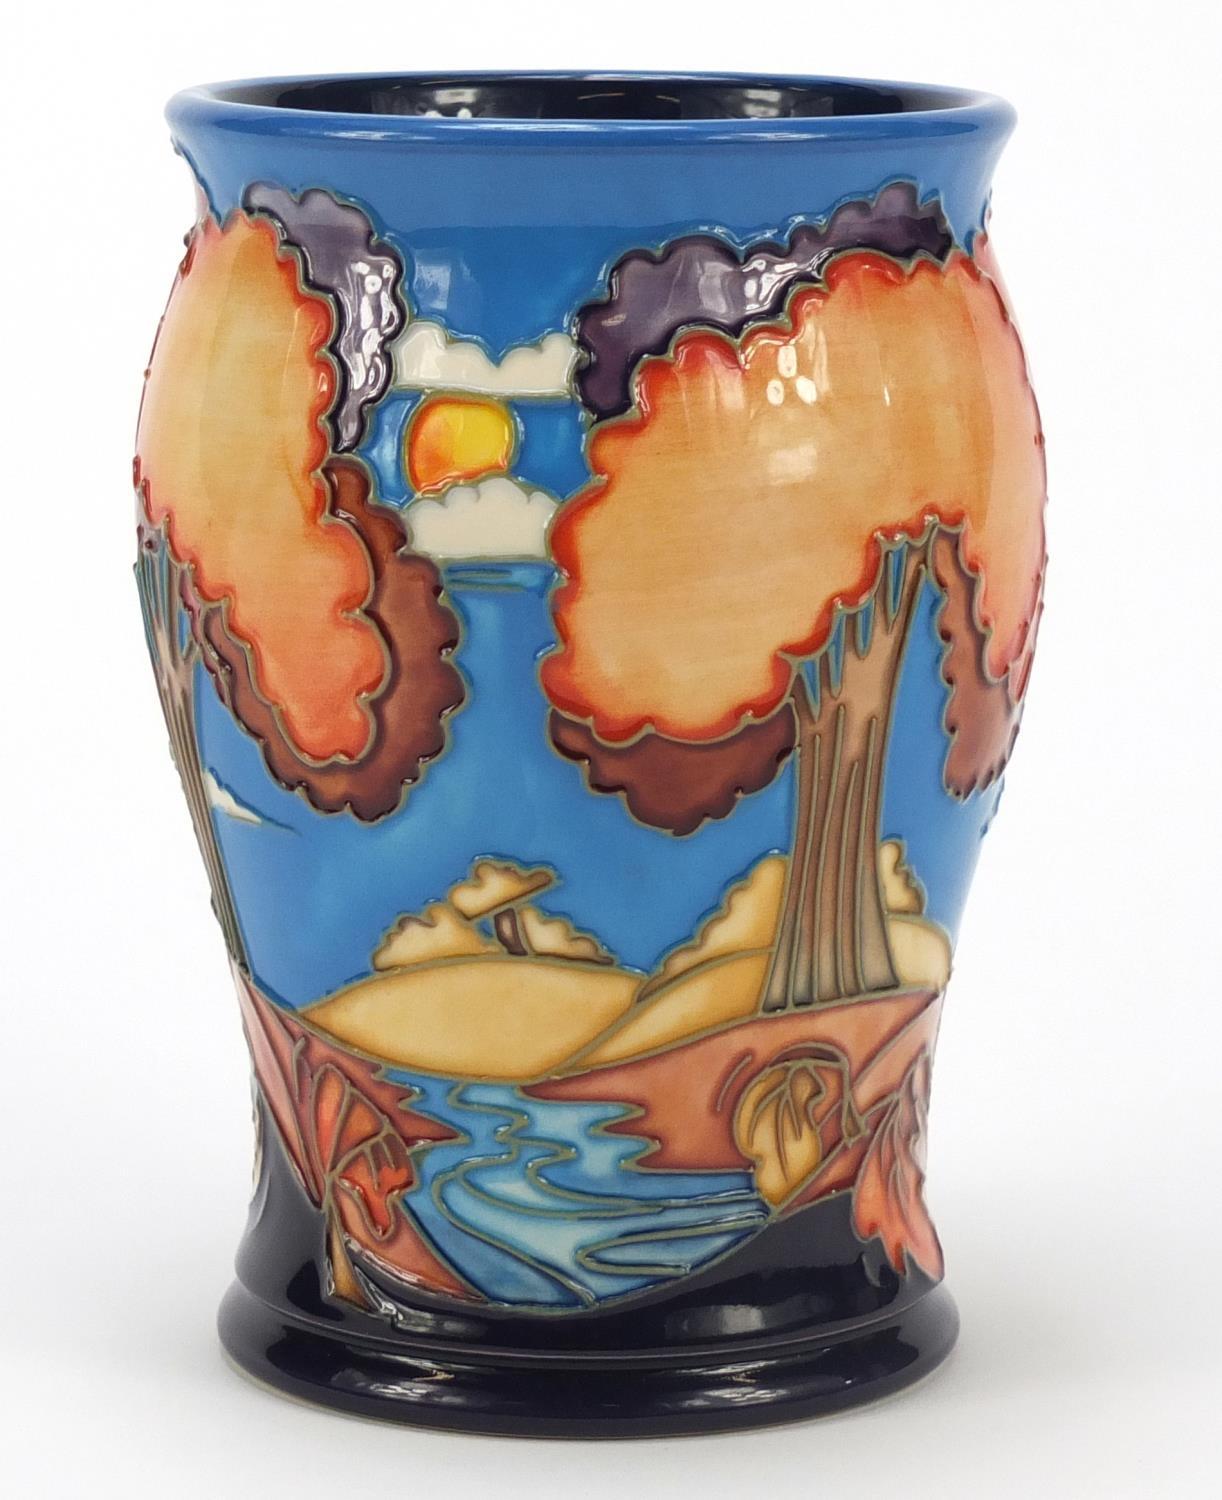 Emma Bossons for Moorcroft, pottery vase hand painted in the Wanderer's Sky pattern, dated 2002, - Image 2 of 9